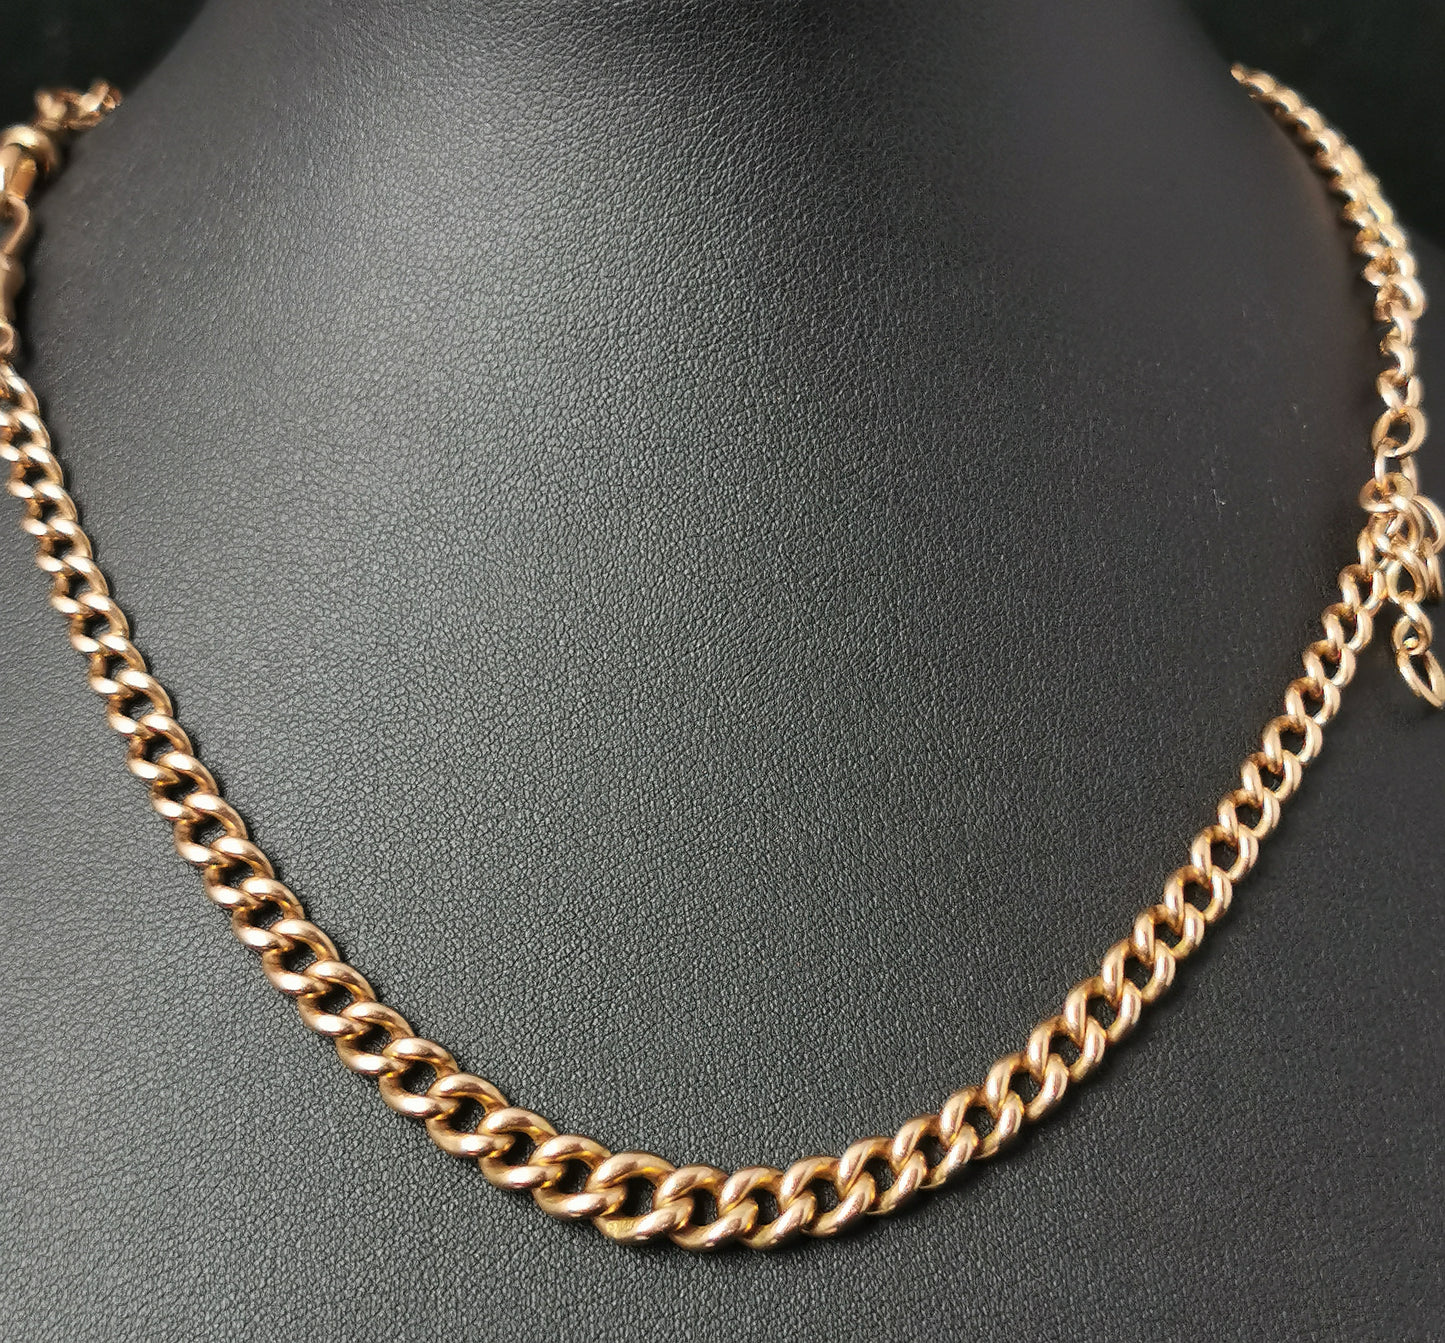 Antique 9ct Rose gold Albert chain, curb link, watch chain necklace